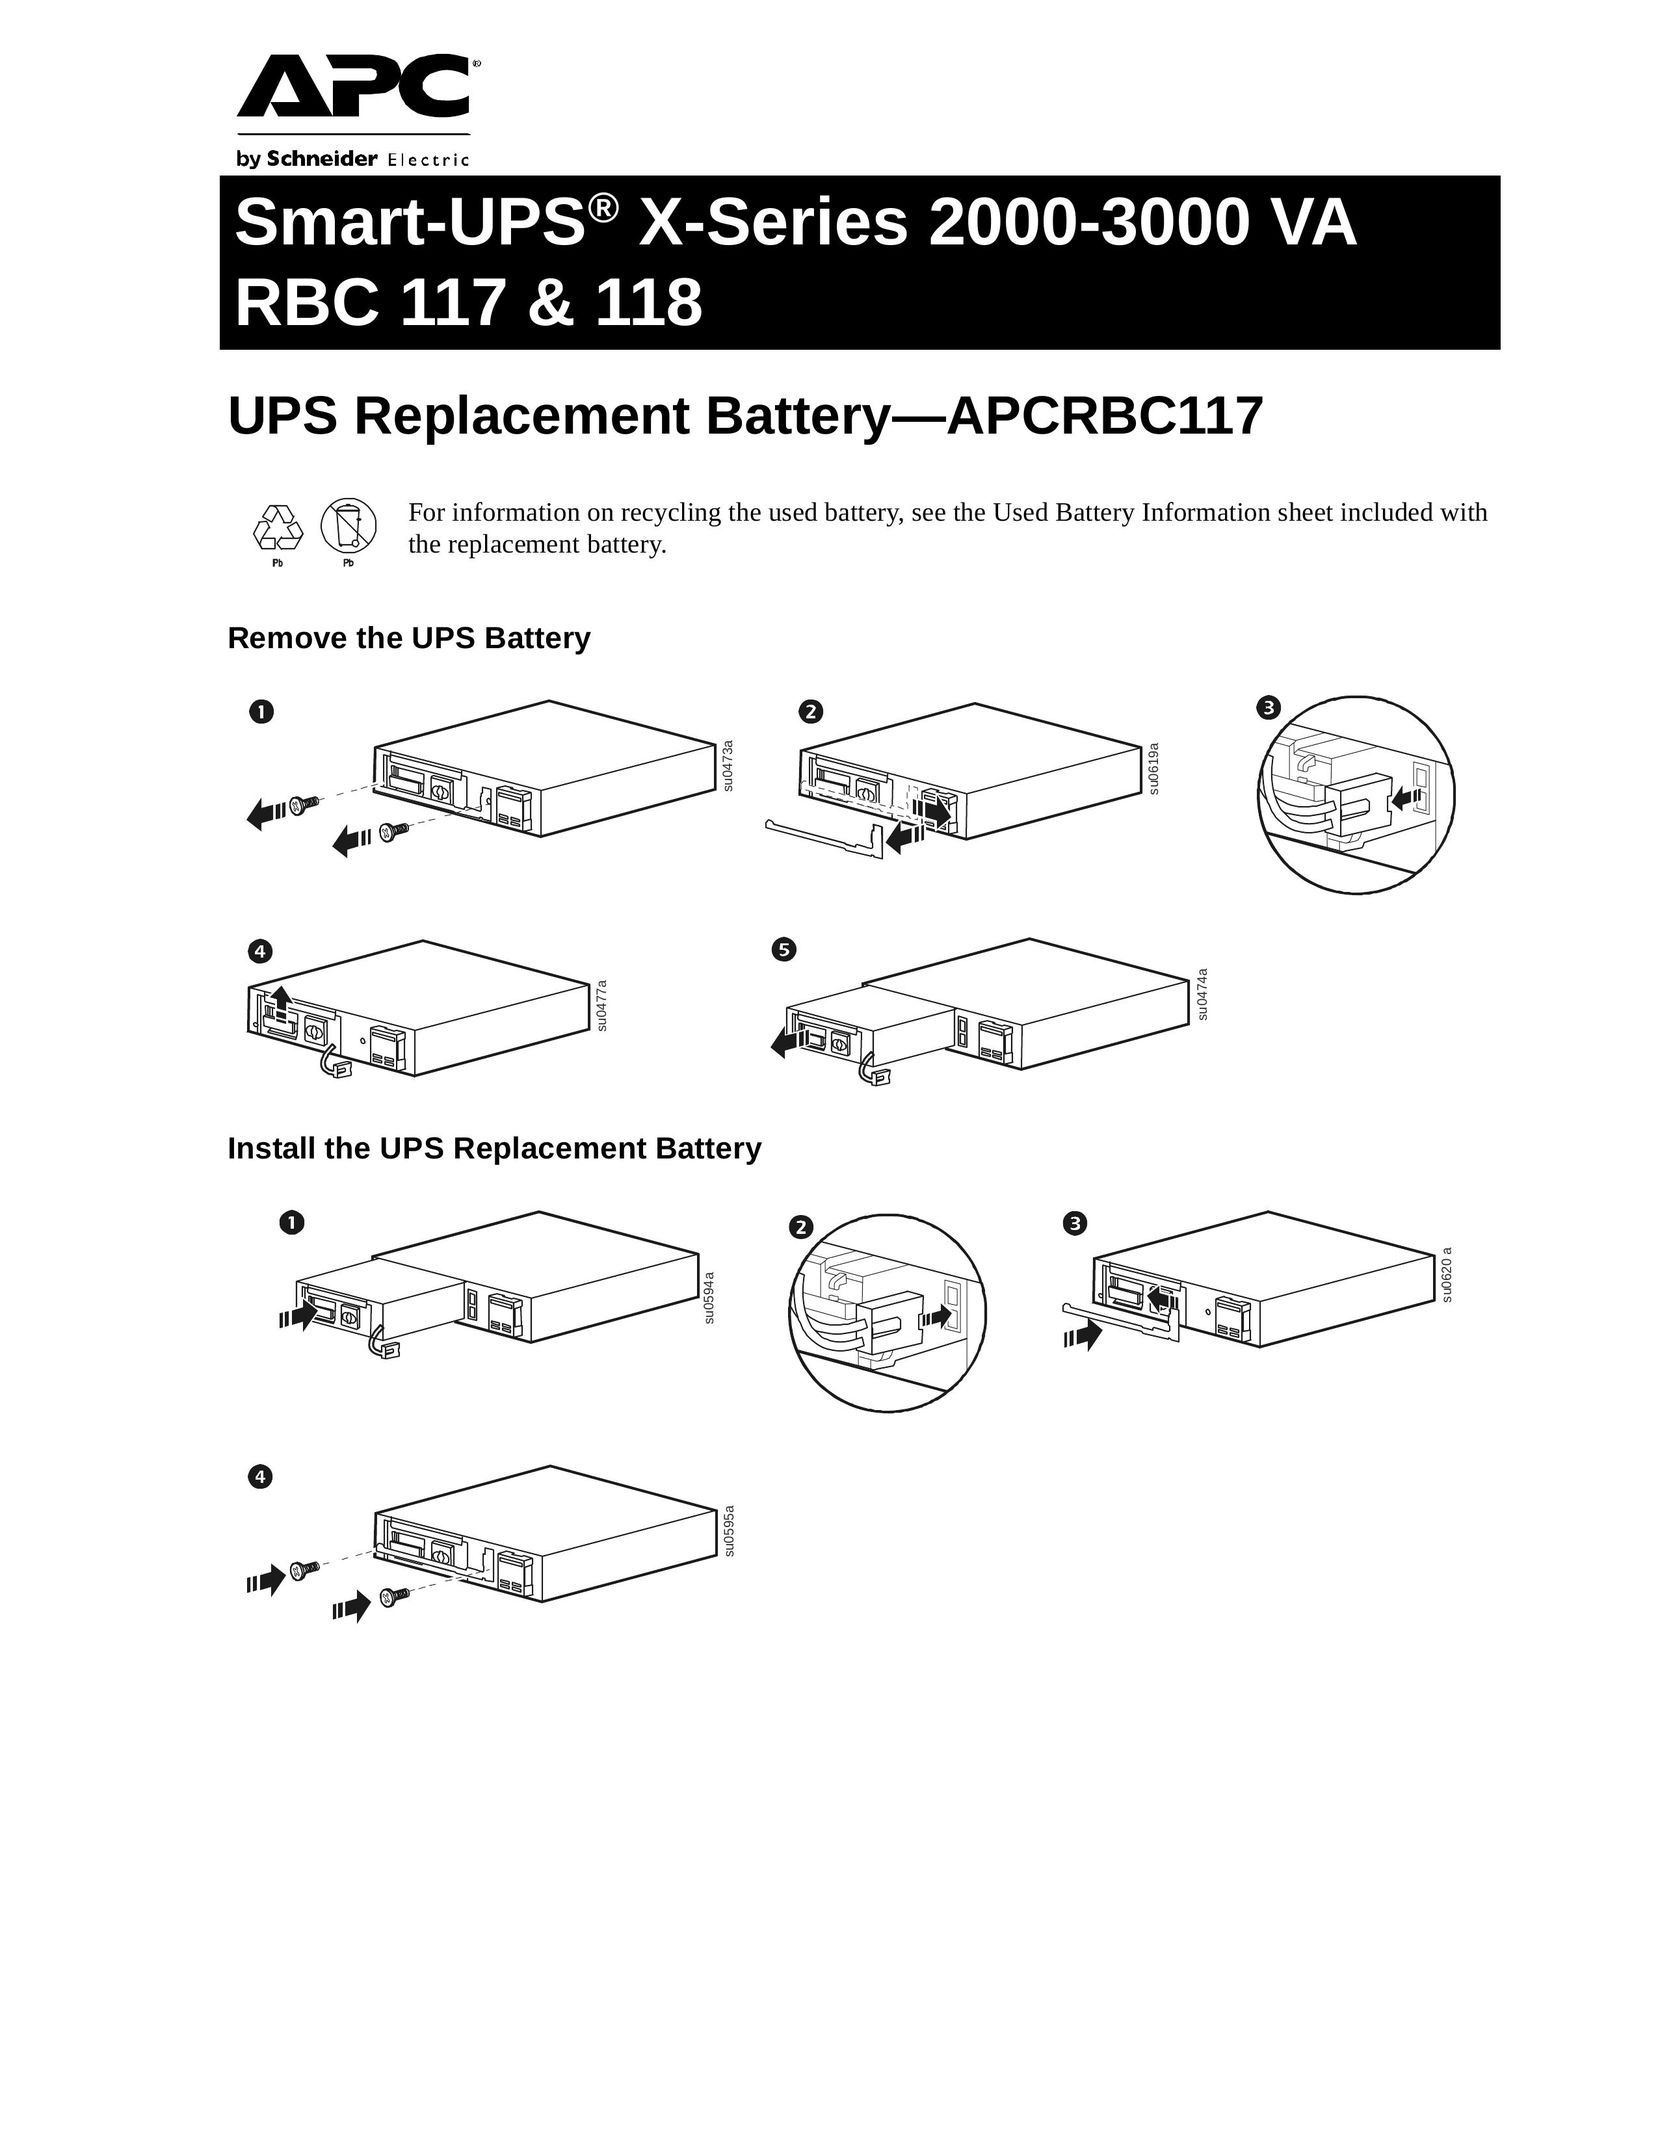 APC 2000 VA Battery Charger User Manual (Page 1)